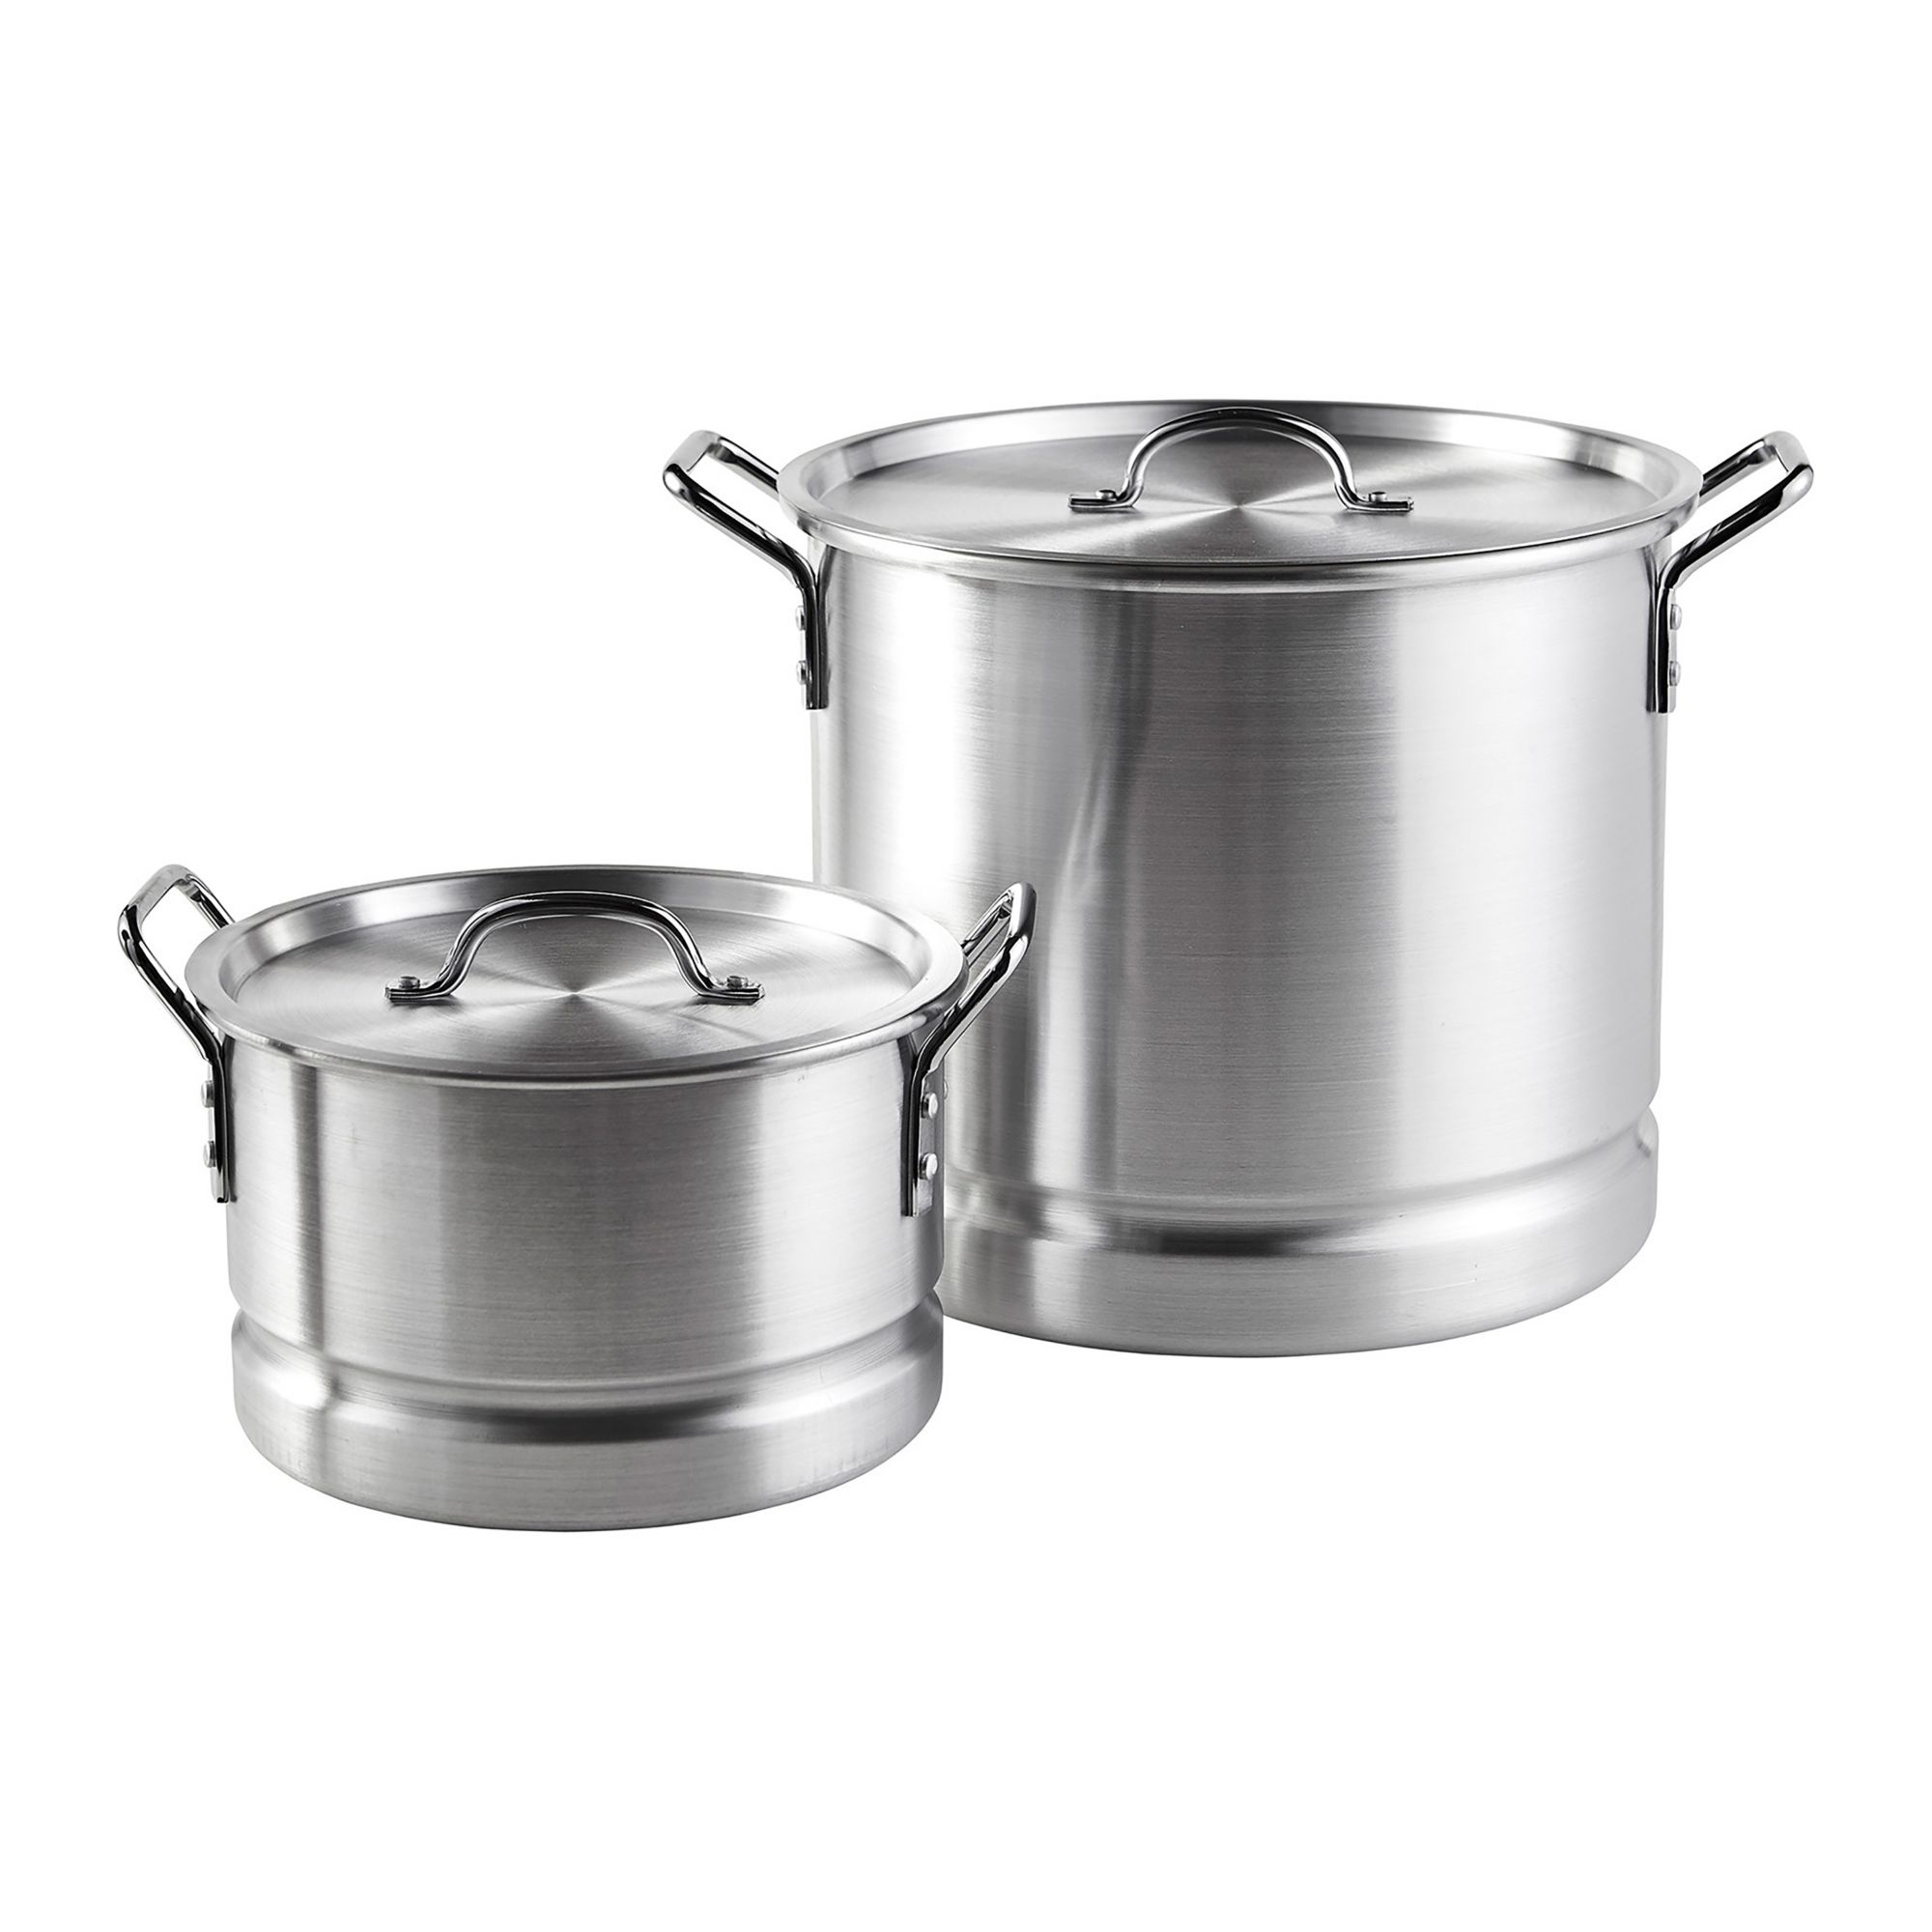 IMUSA MEXICANA-34 32-Quart Tamale and Seafood Steamer, Silver